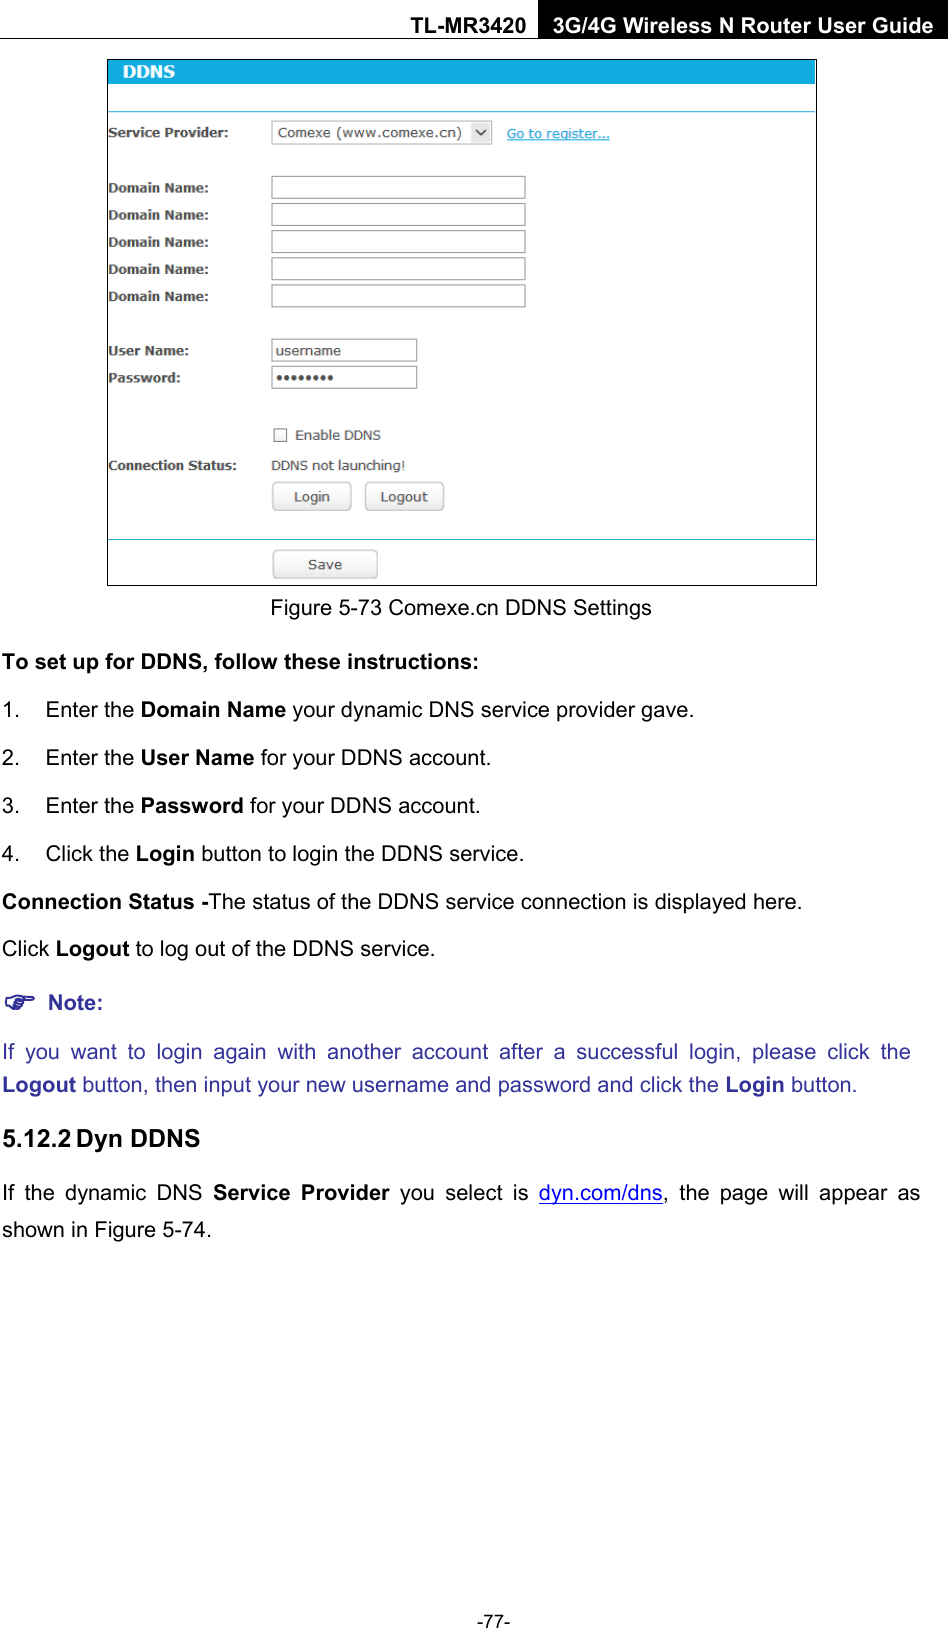    -77- TL-MR3420 3G/4G Wireless N Router User Guide  Figure 5-73 Comexe.cn DDNS Settings To set up for DDNS, follow these instructions: 1. Enter the Domain Name your dynamic DNS service provider gave.   2. Enter the User Name for your DDNS account.   3. Enter the Password for your DDNS account.   4. Click the Login button to login the DDNS service.   Connection Status -The status of the DDNS service connection is displayed here. Click Logout to log out of the DDNS service.    Note: If you want to login again with another account after a successful login, please click the Logout button, then input your new username and password and click the Login button. 5.12.2 Dyn DDNS If the dynamic DNS Service Provider you select is dyn.com/dns,  the page will appear as shown in Figure 5-74. 